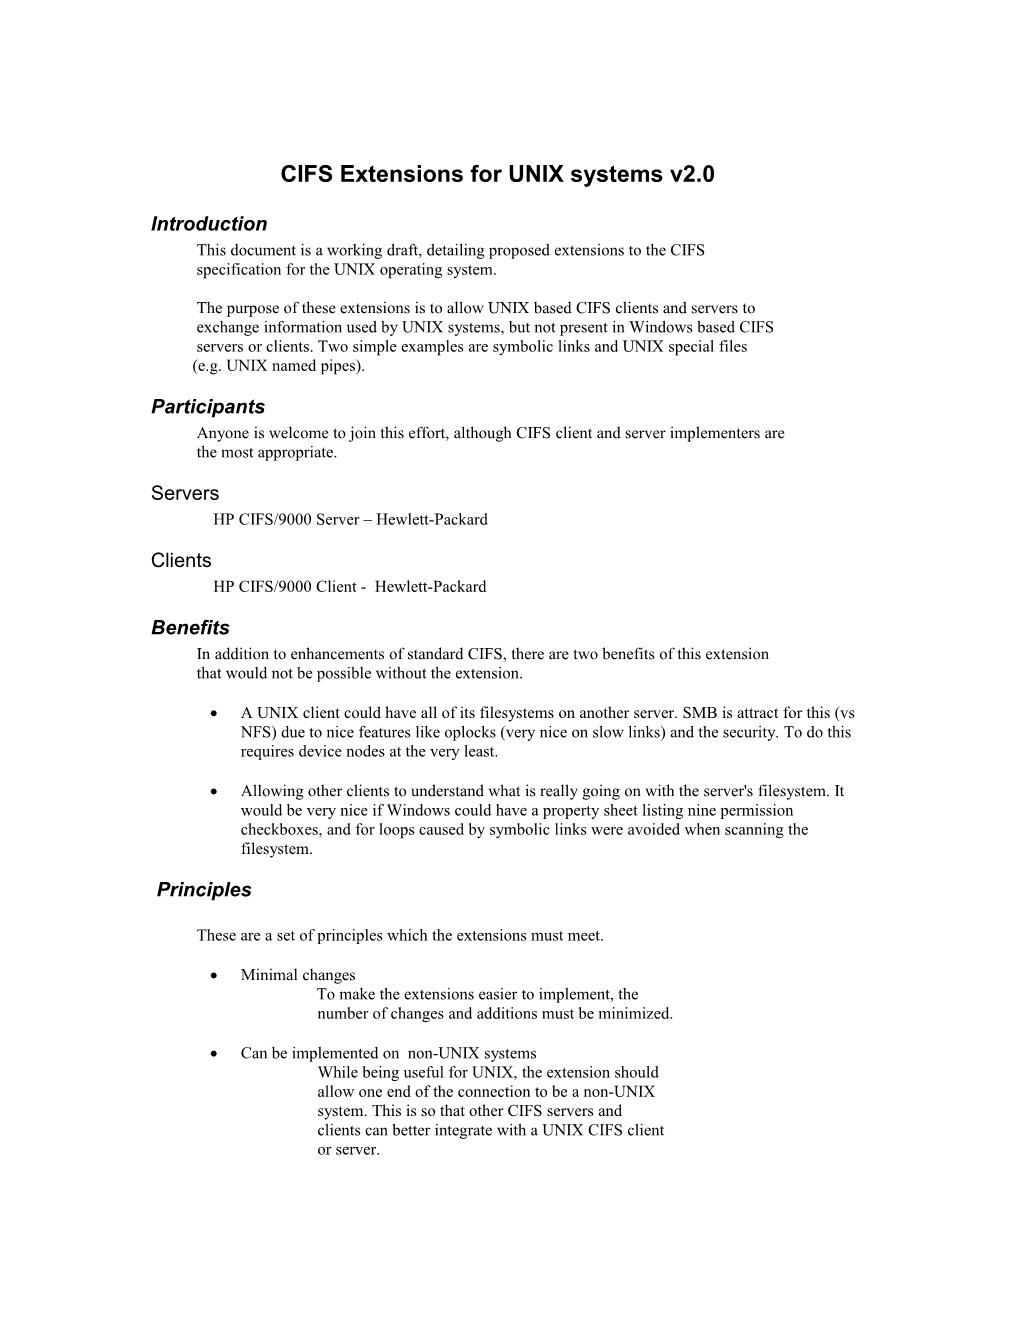 CIFS Extensions for UNIX Systems V1